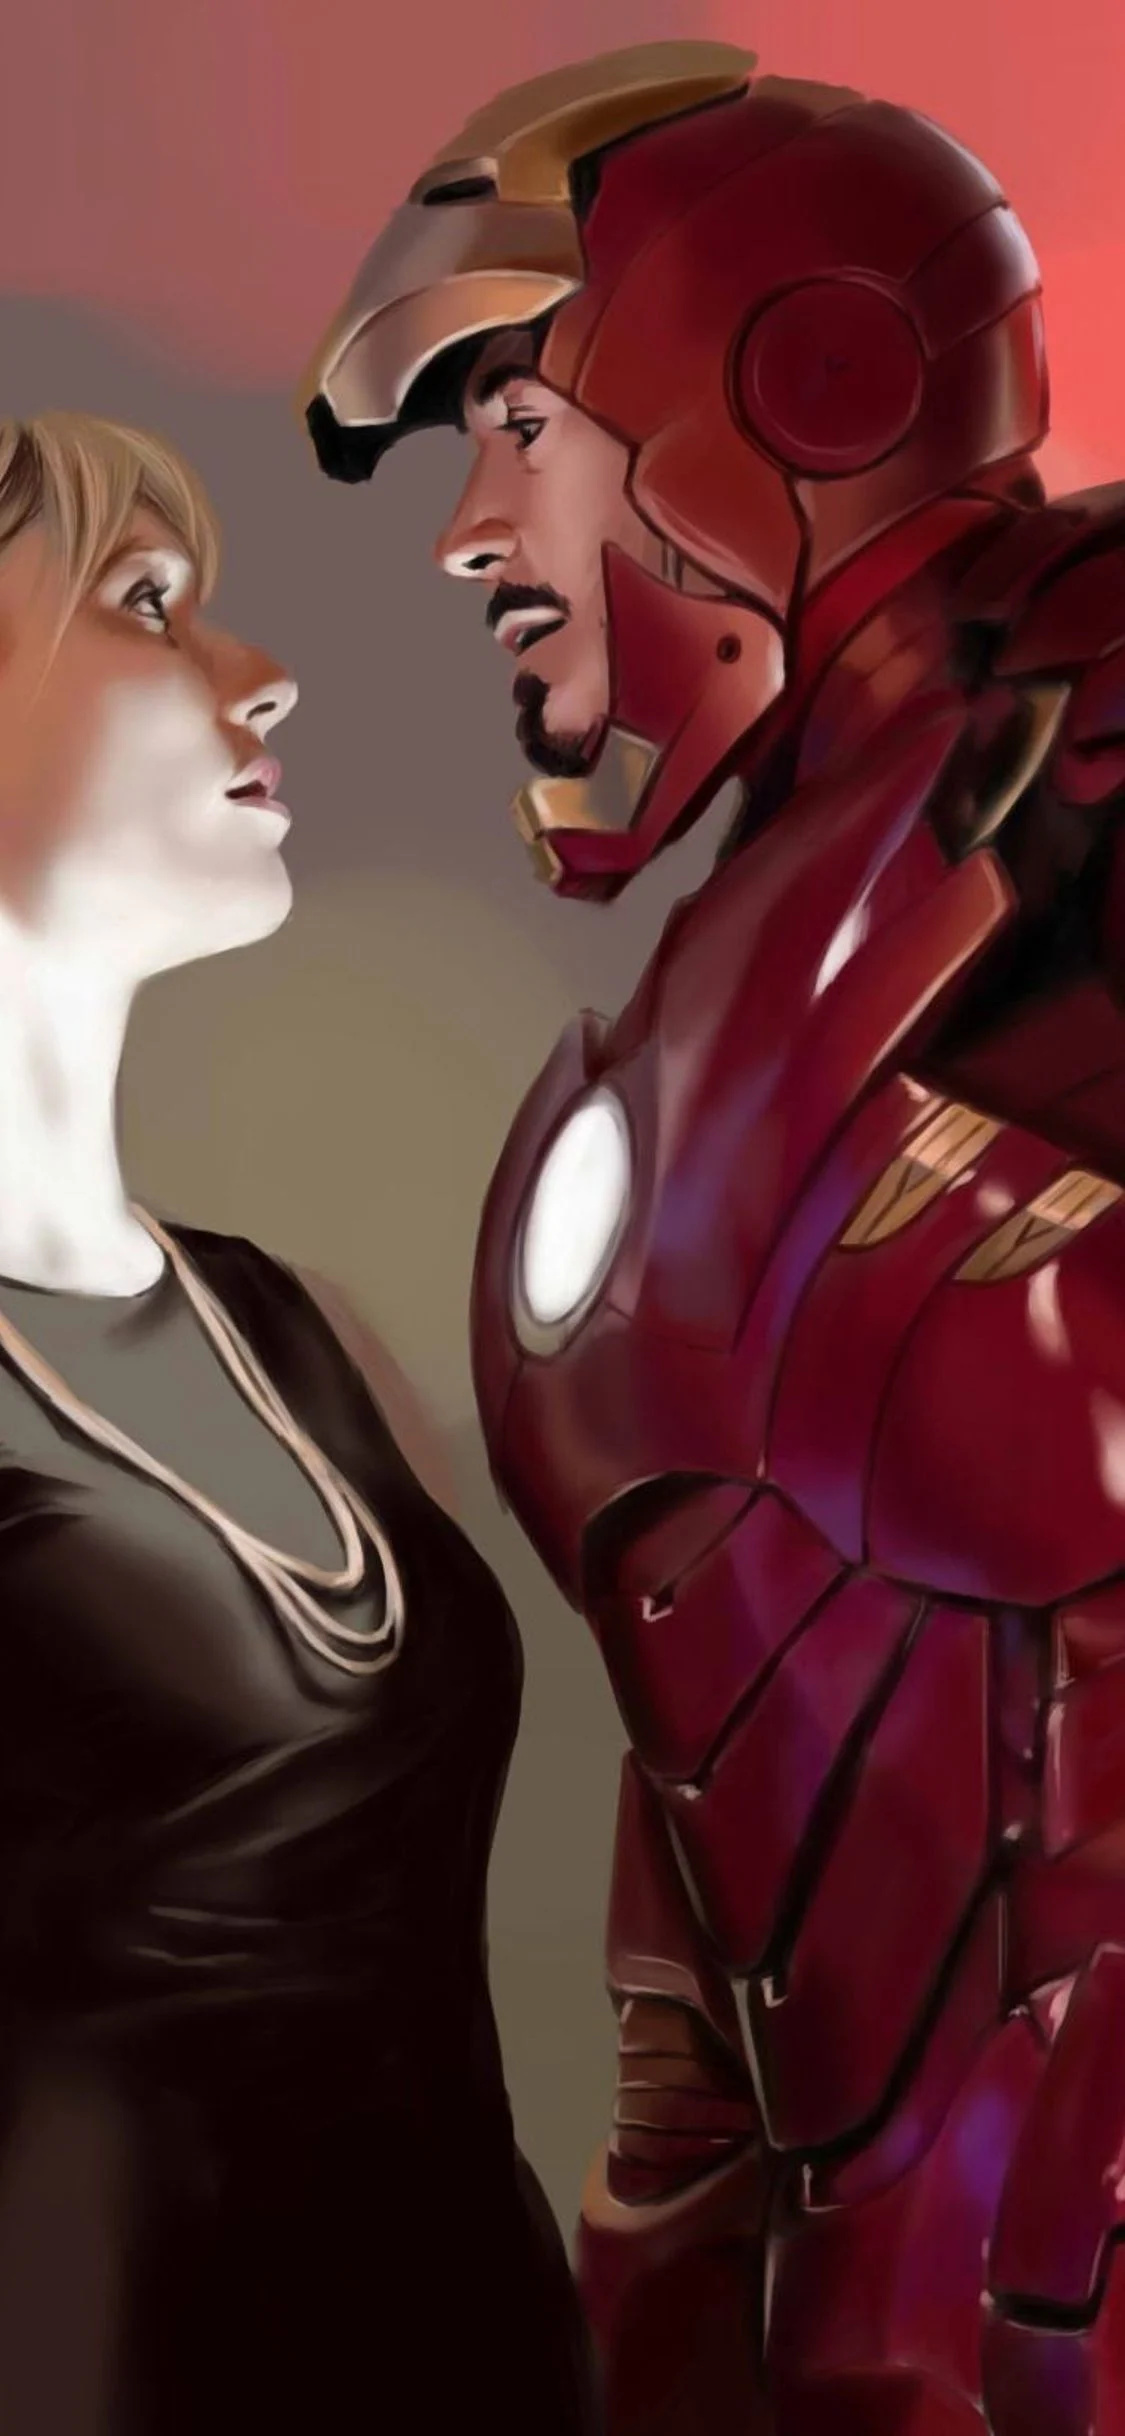 Iron Man, Pepper Potts, Top free, Awesome backgrounds, 1130x2440 HD Handy